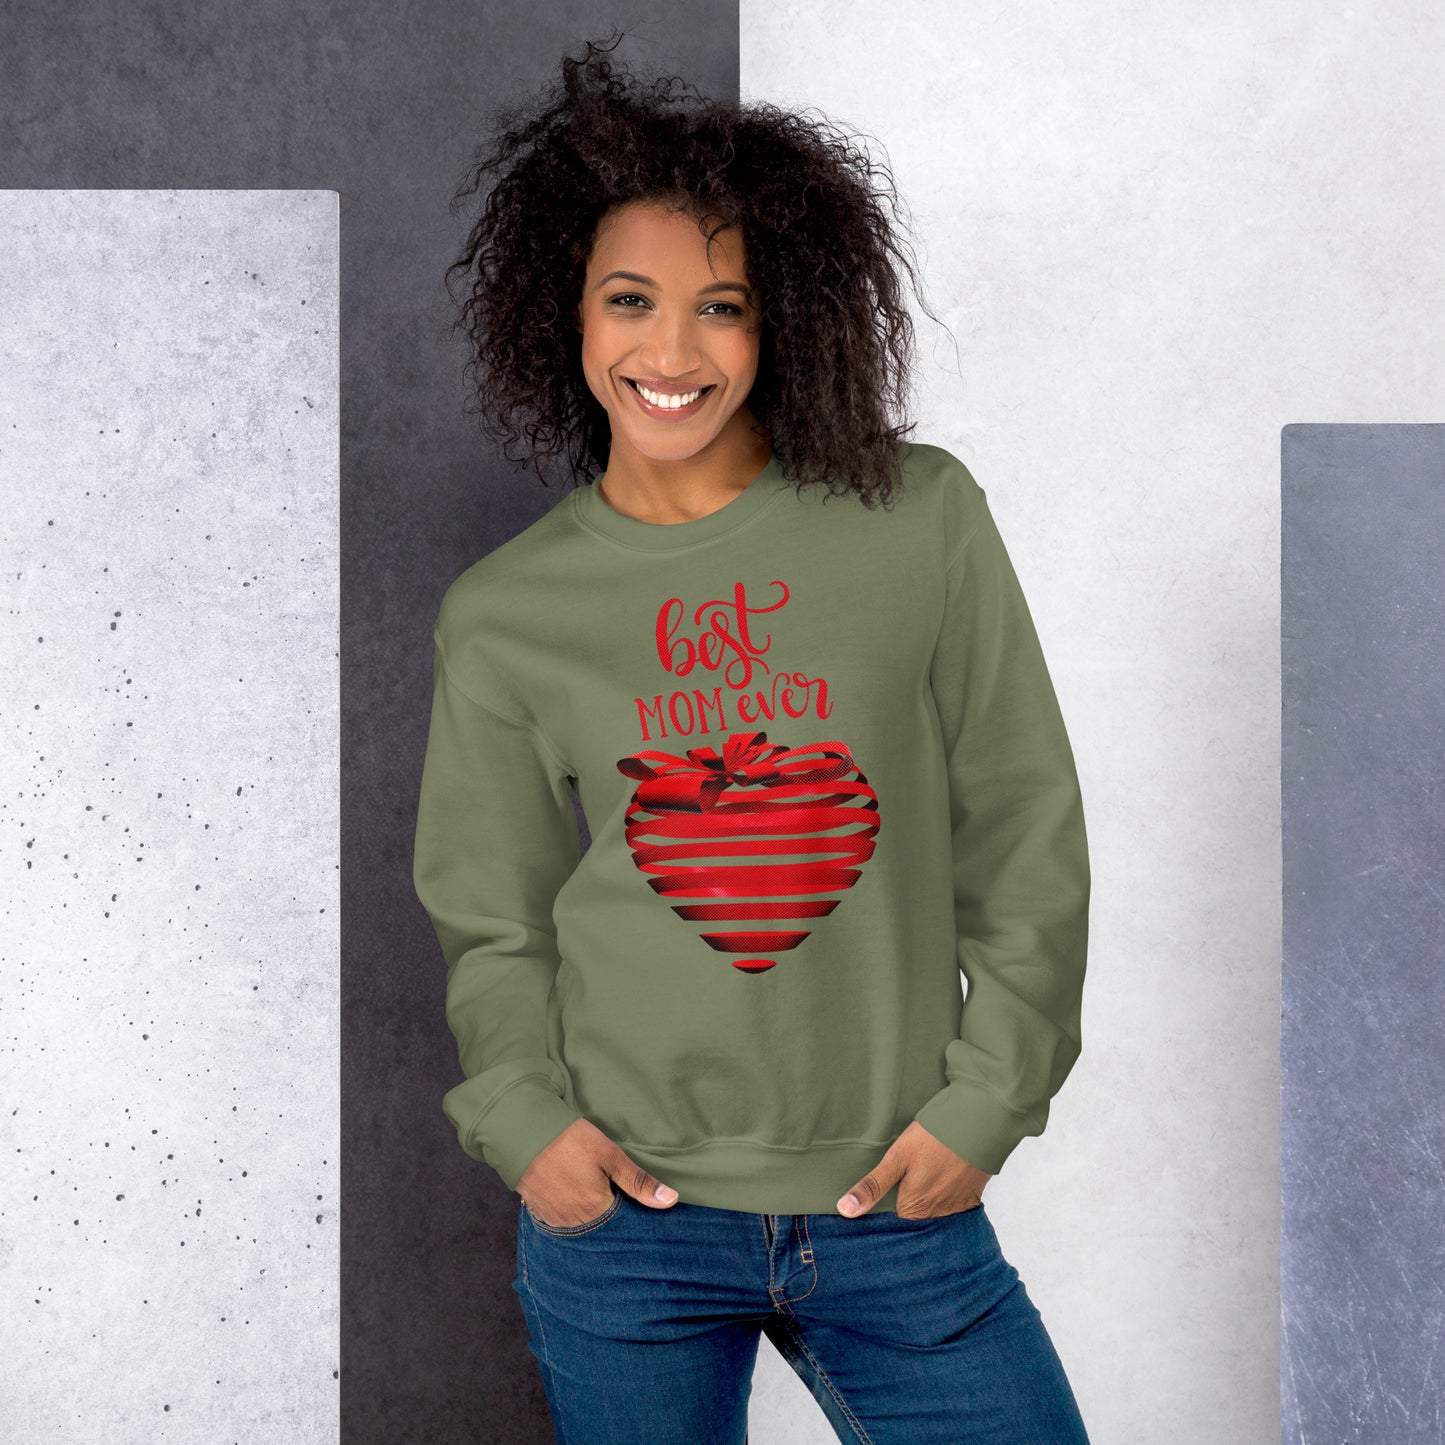 Women with military green sweater with red text best MOM Ever and red heart